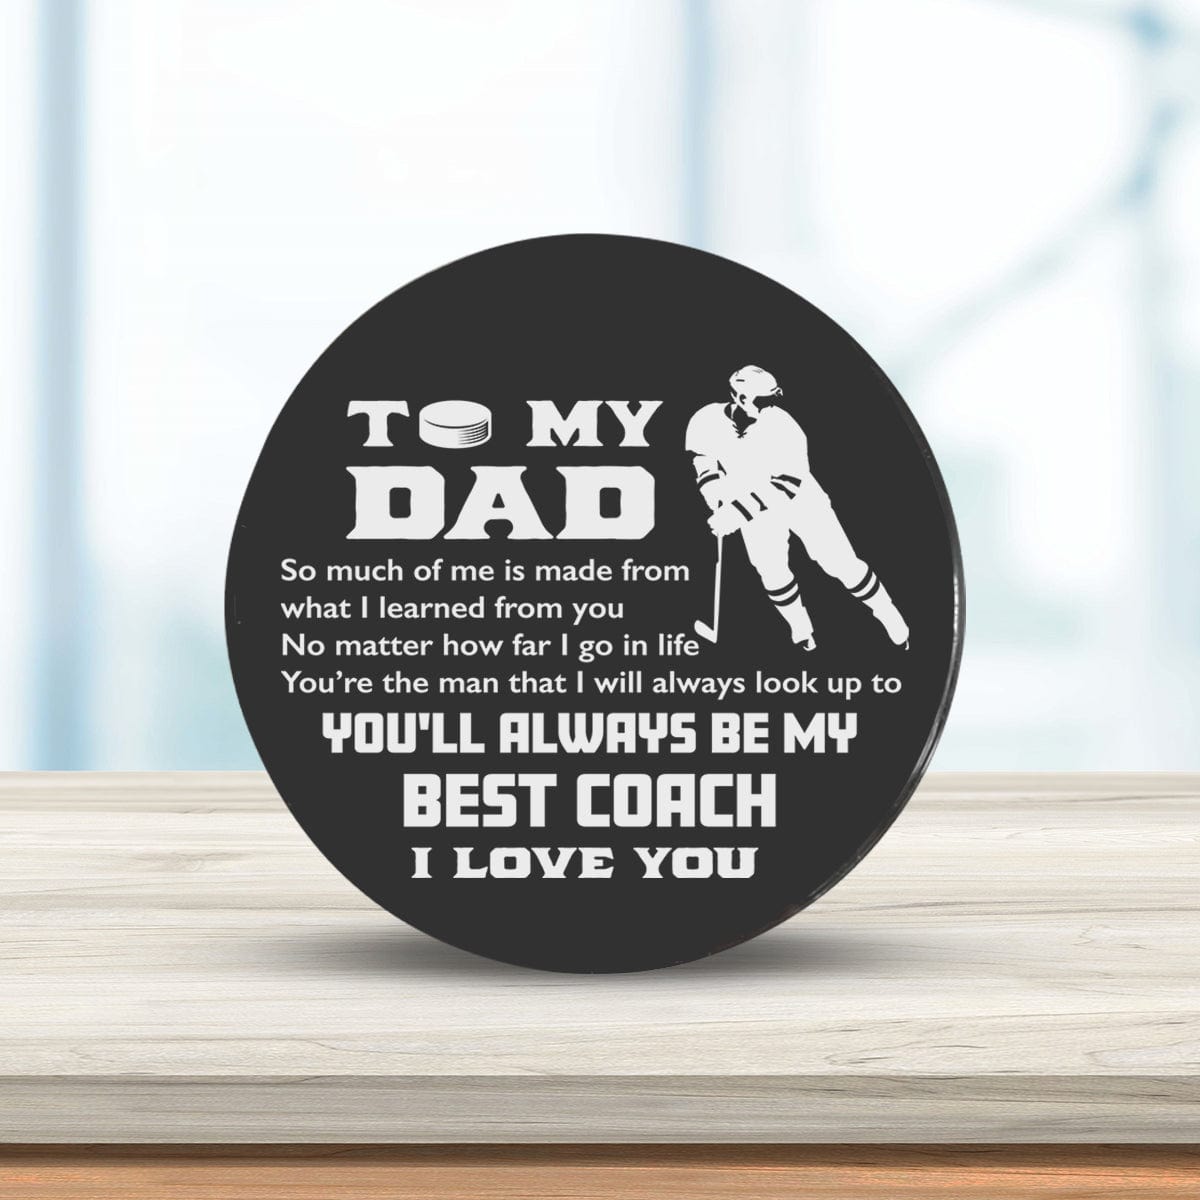 Hockey Puck - Hockey - To My Dad - You’re The Man That I Will Always Look Up To - Gai18018